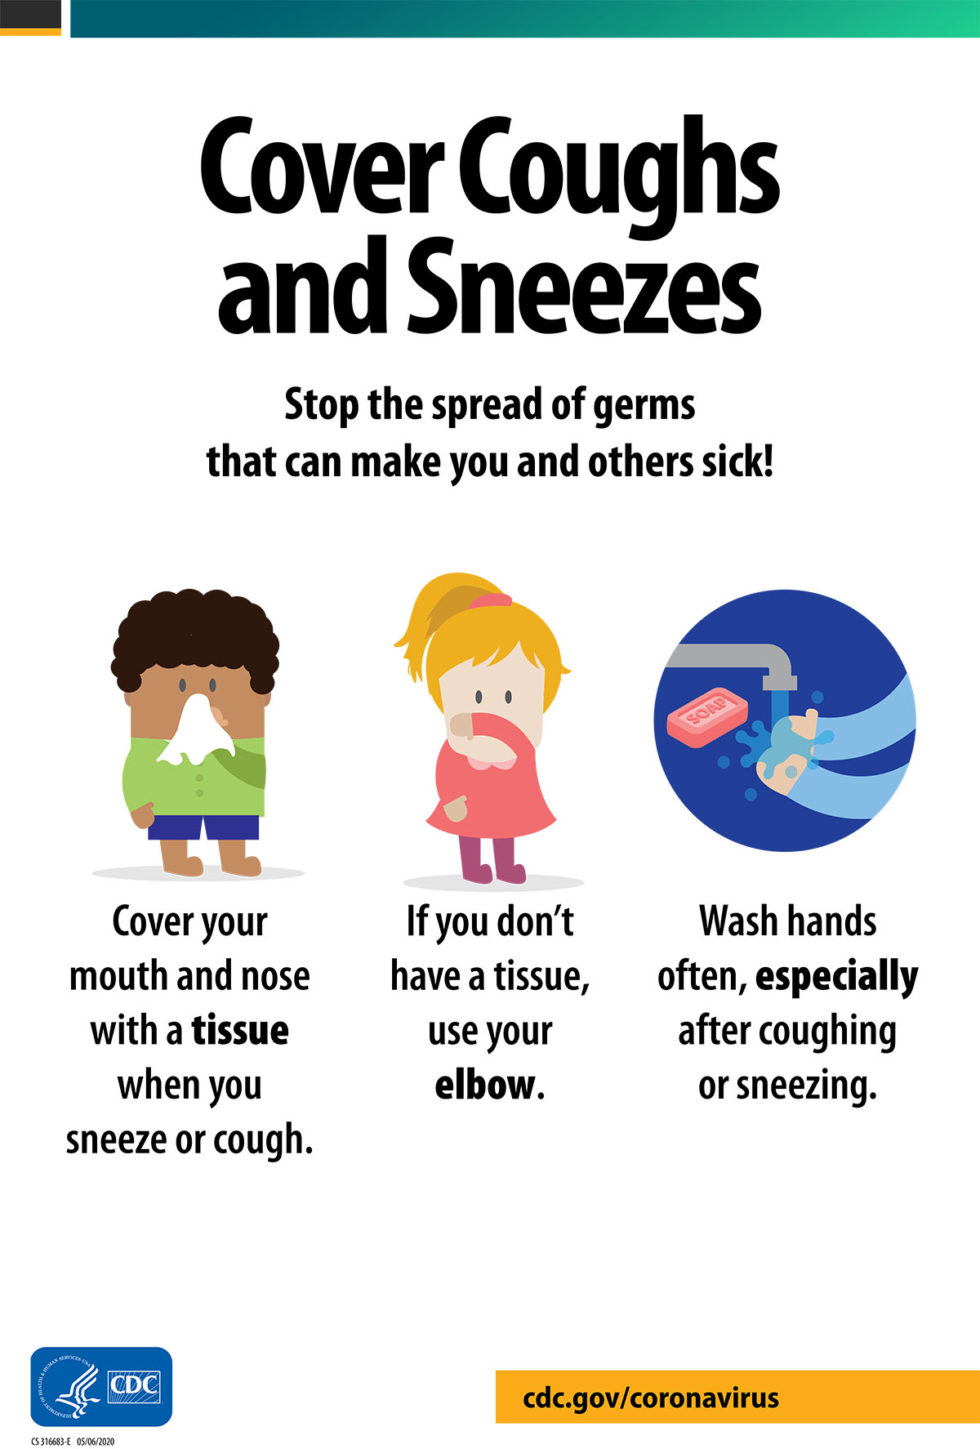 Cover your coughs - KidsCentral